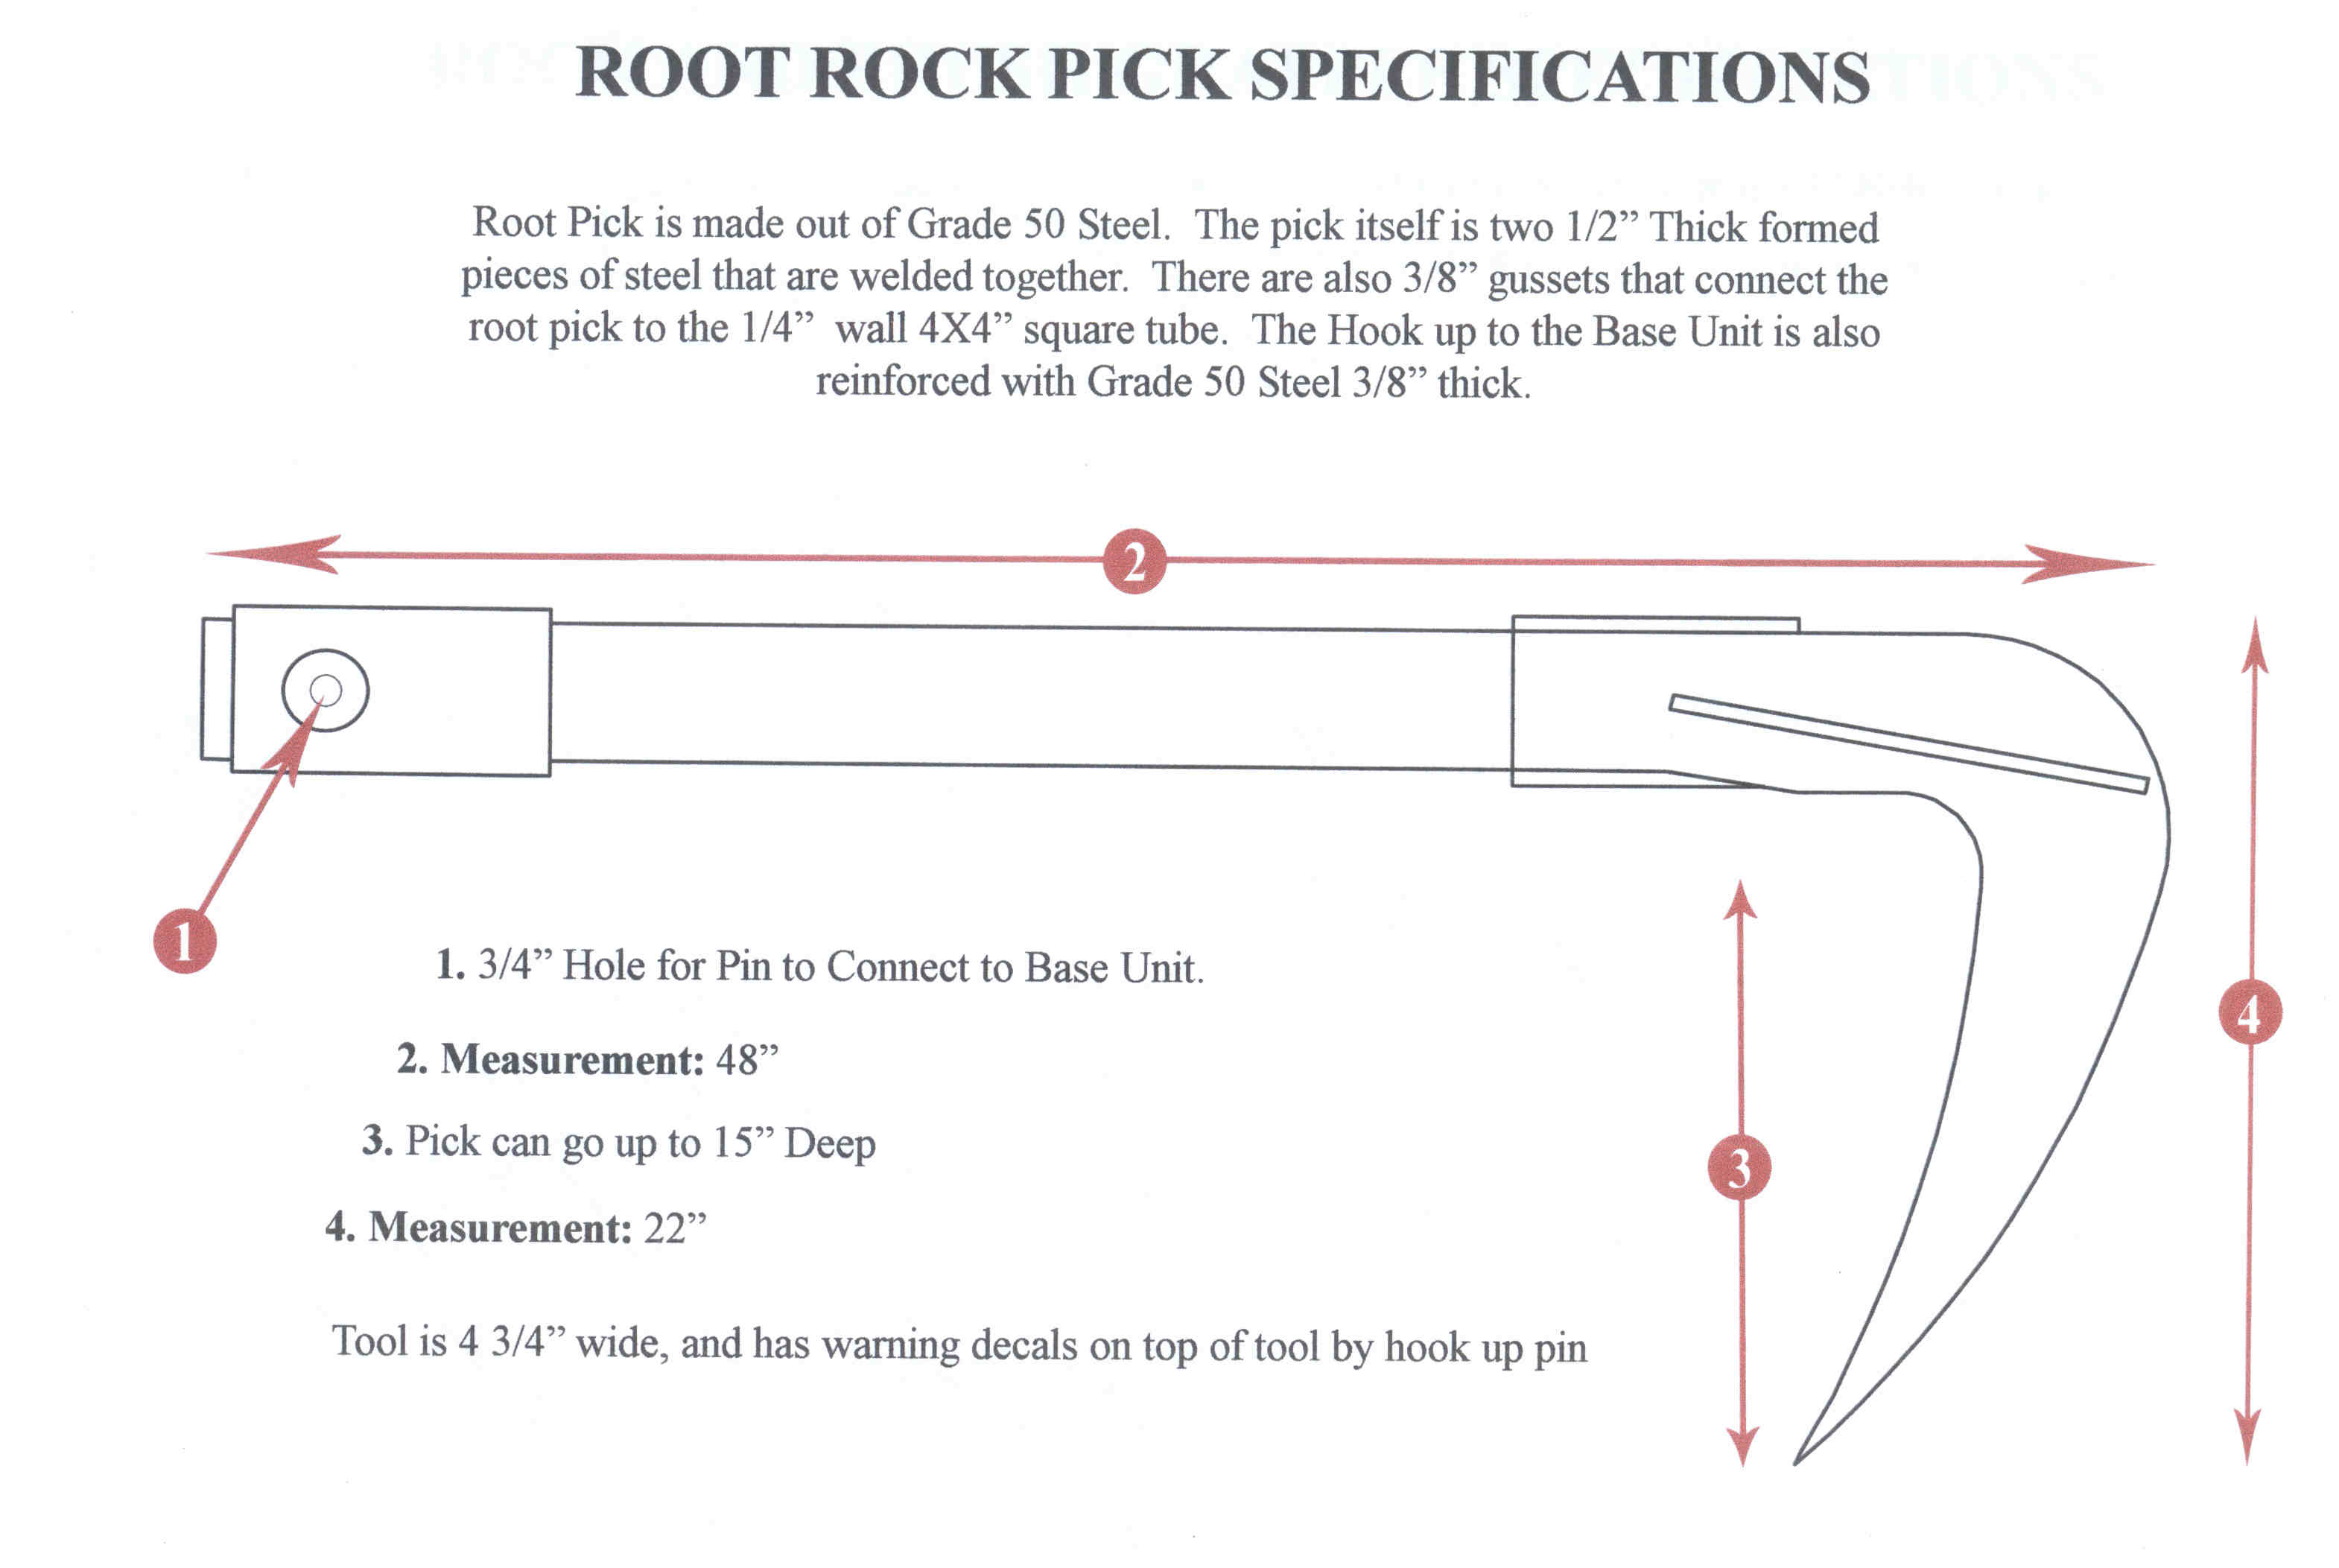 Specifications On Root Rock Pick